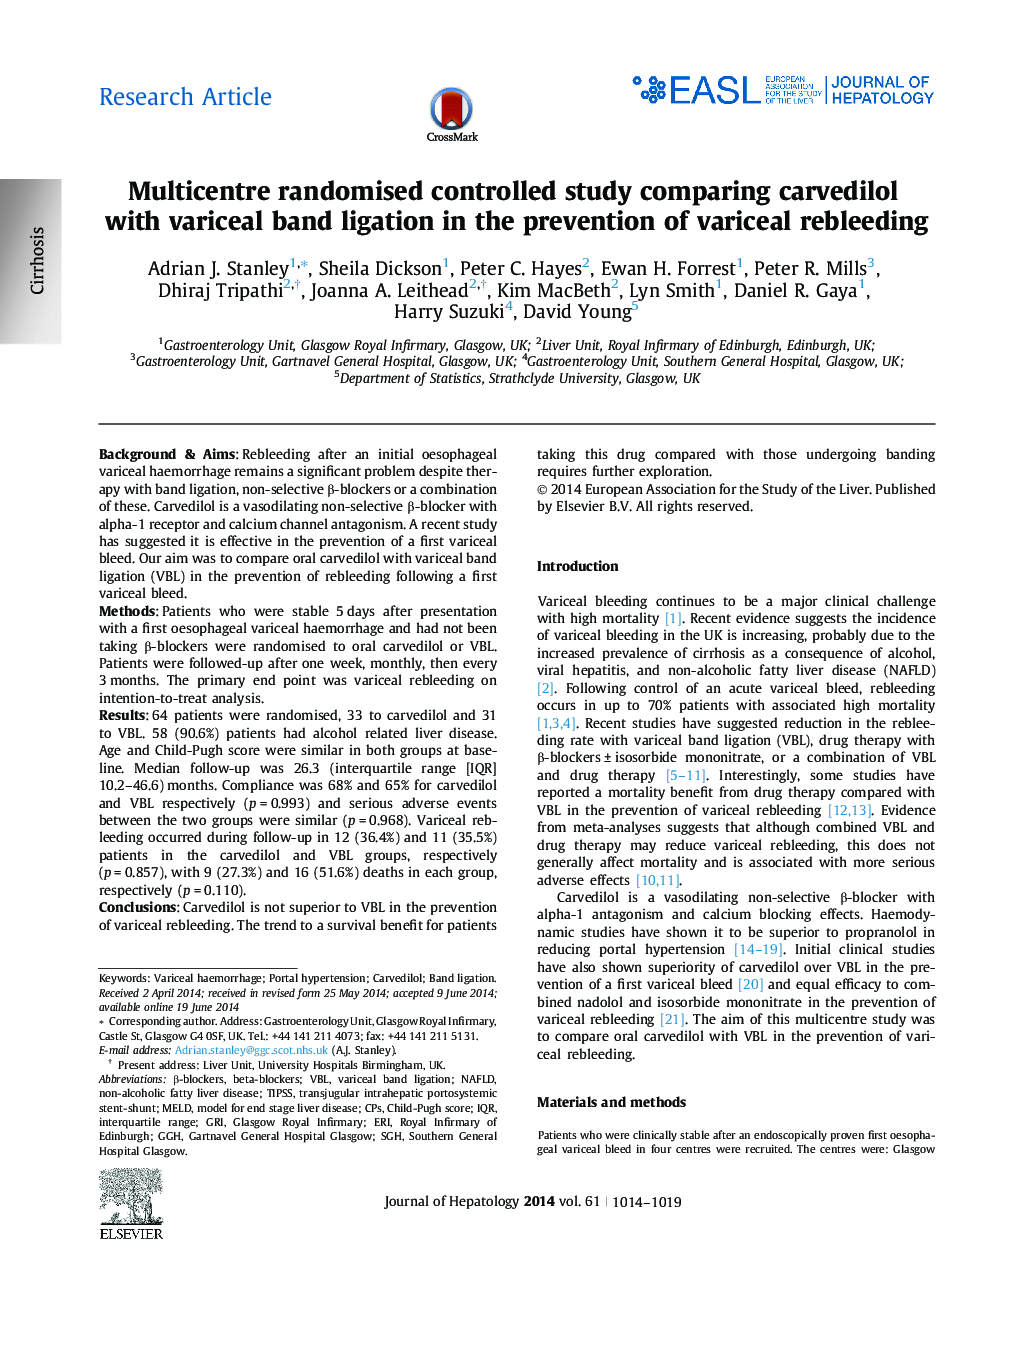 Research ArticleMulticentre randomised controlled study comparing carvedilol with variceal band ligation in the prevention of variceal rebleeding